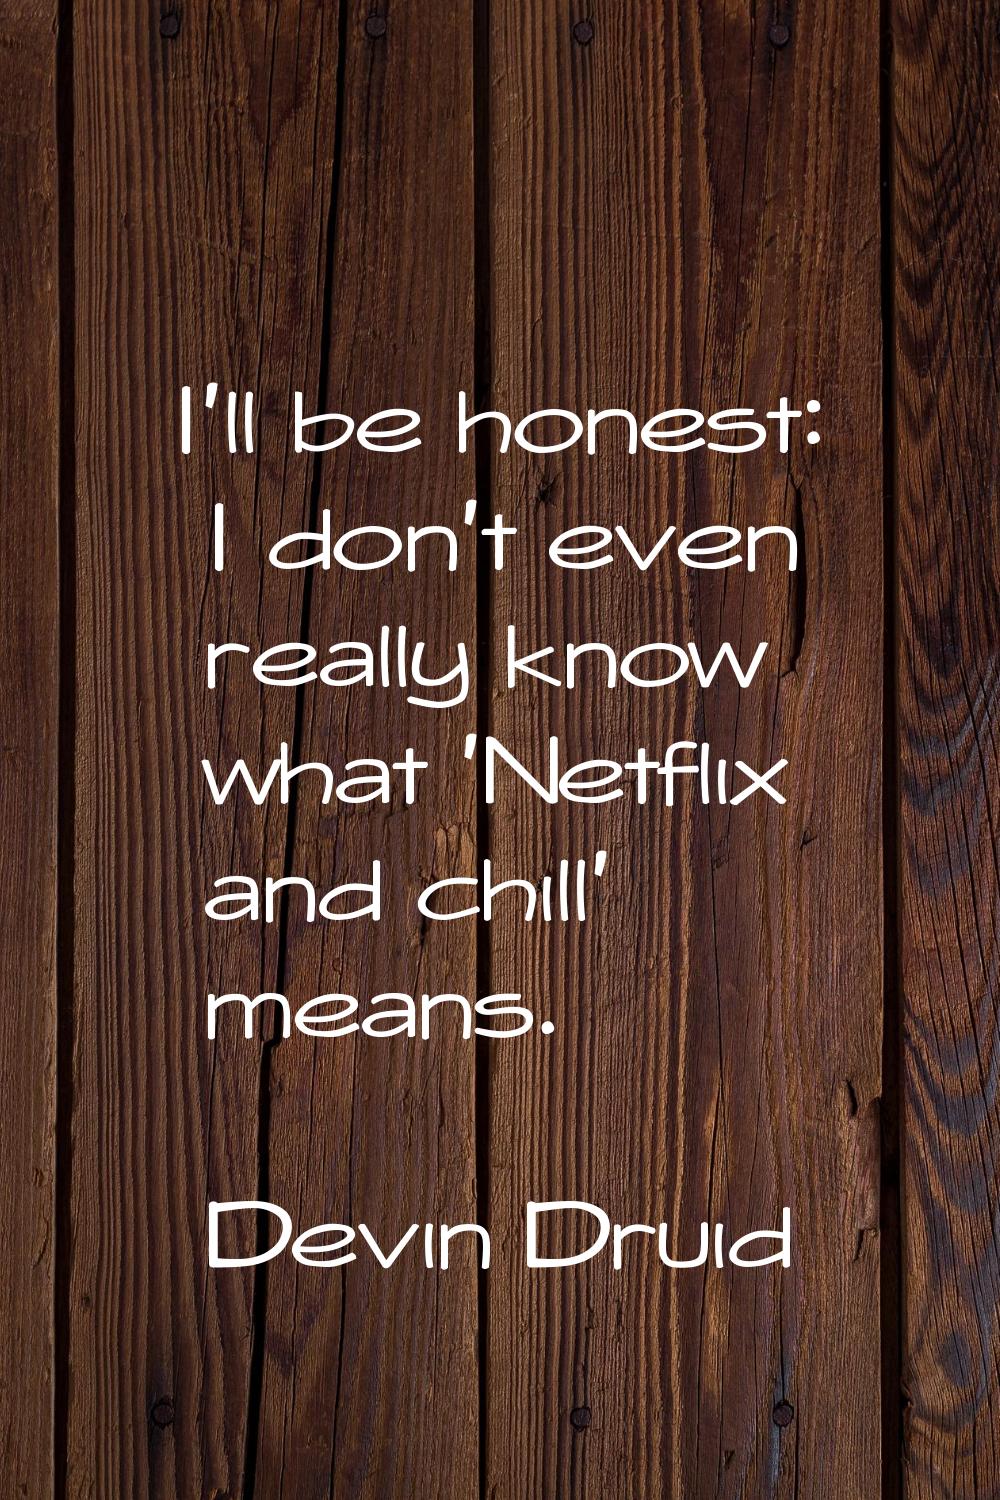 I'll be honest: I don't even really know what 'Netflix and chill' means.